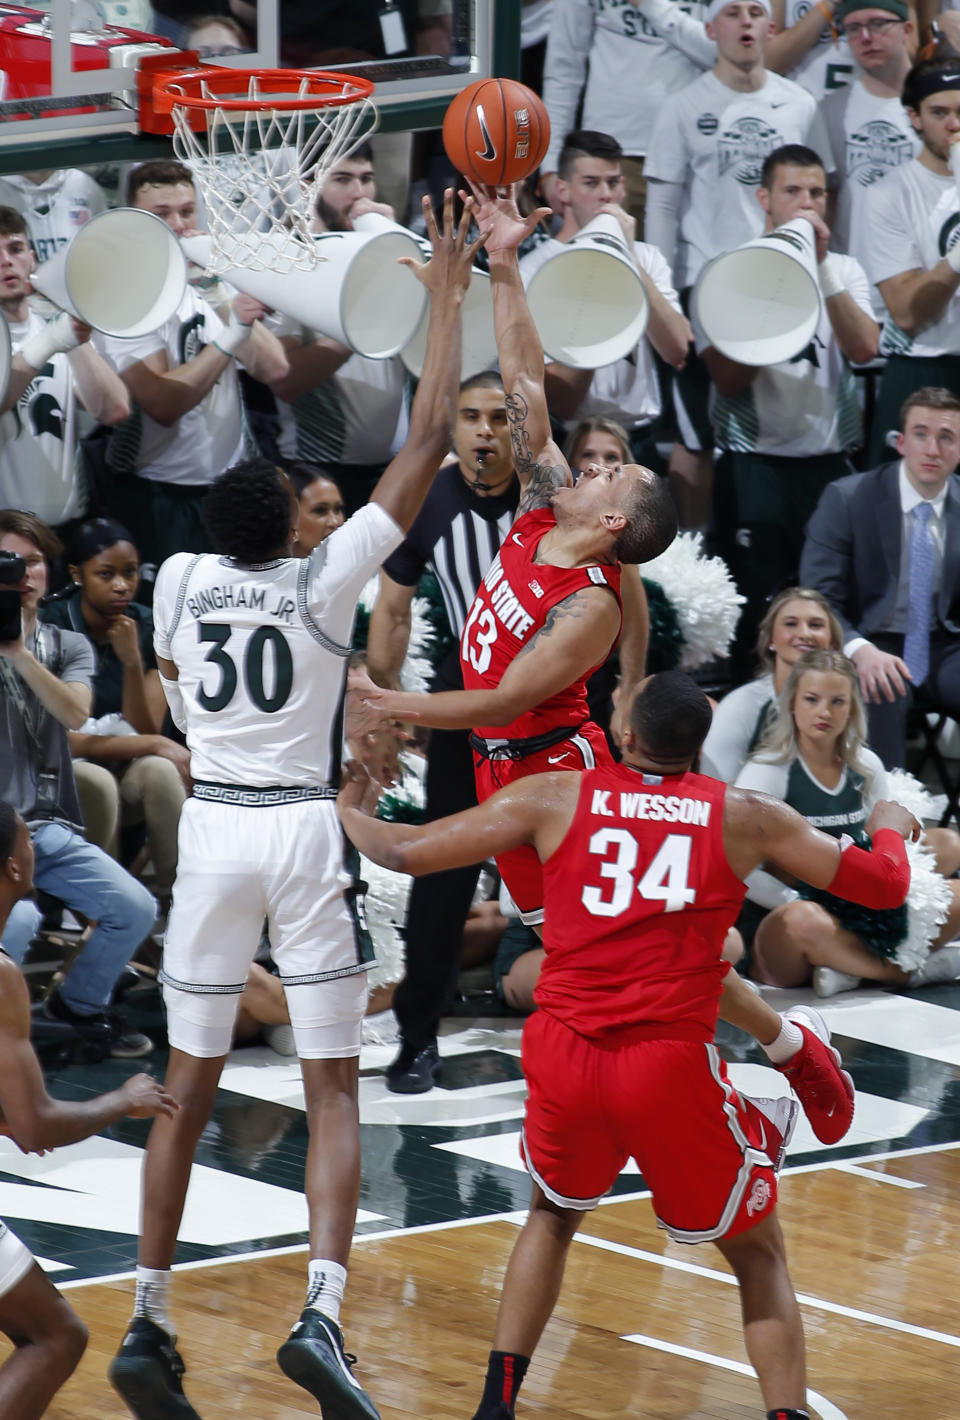 Ohio State's CJ Walker (13) puts up a layup against Michigan State's Marcus Bingham Jr. (30) during the first half of an NCAA college basketball game, Sunday, March 8, 2020, in East Lansing, Mich. (AP Photo/Al Goldis)